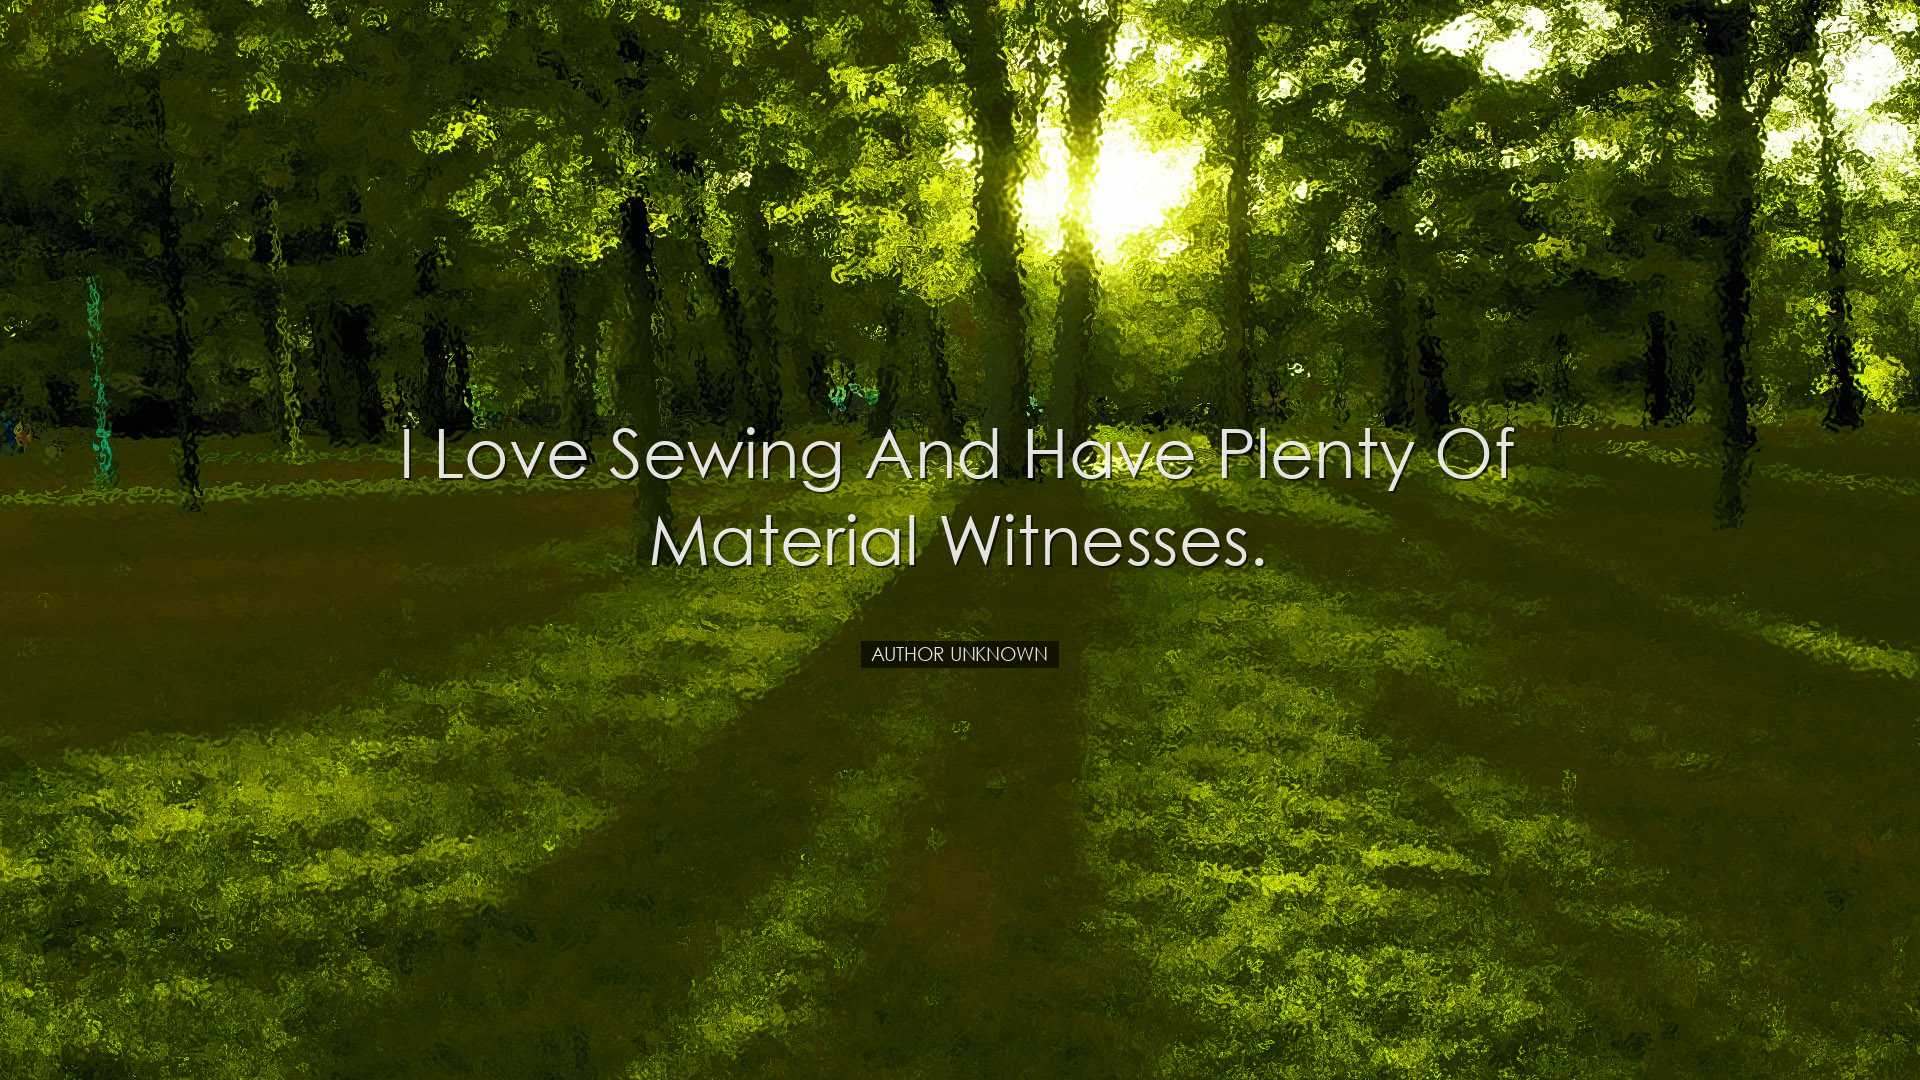 I love sewing and have plenty of material witnesses. - Author Unkn